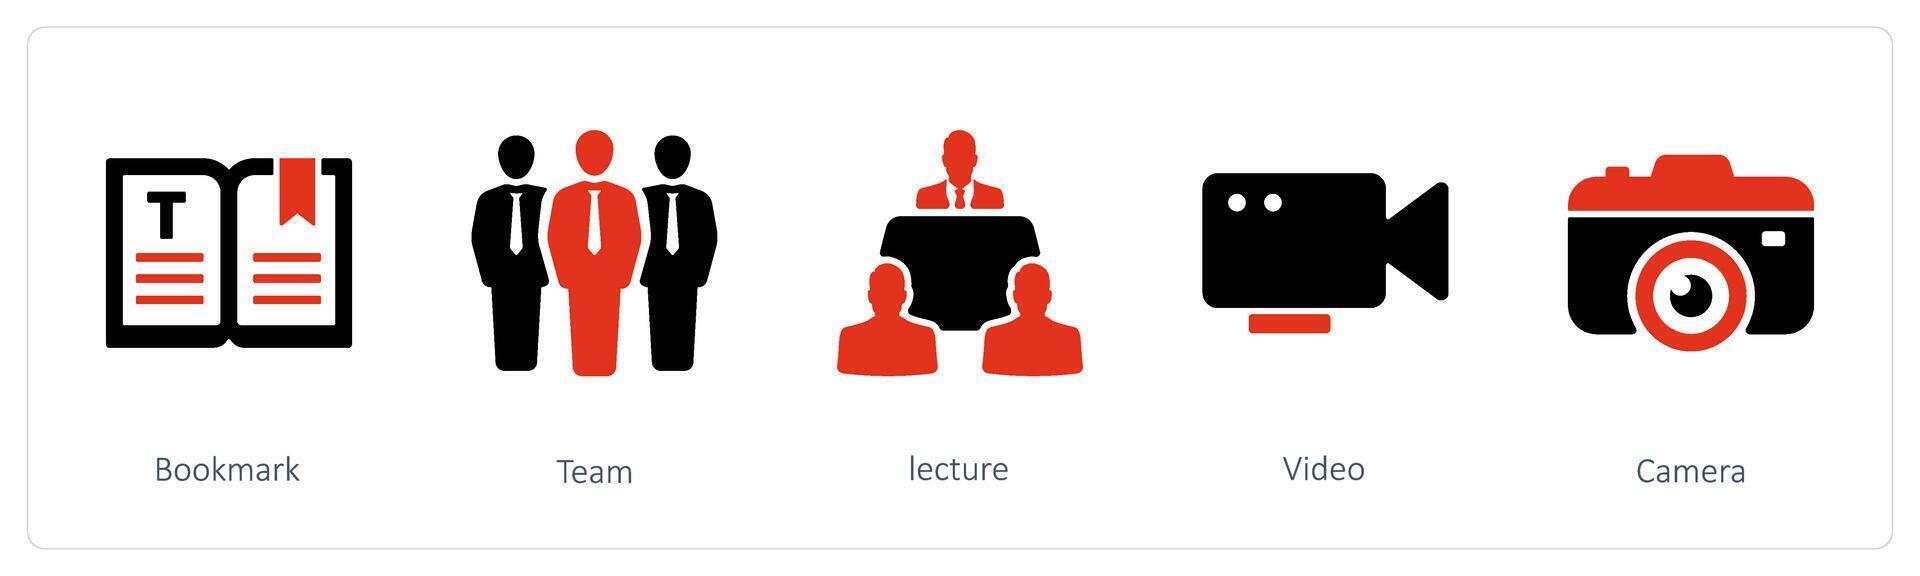 bookmark and lecture vector